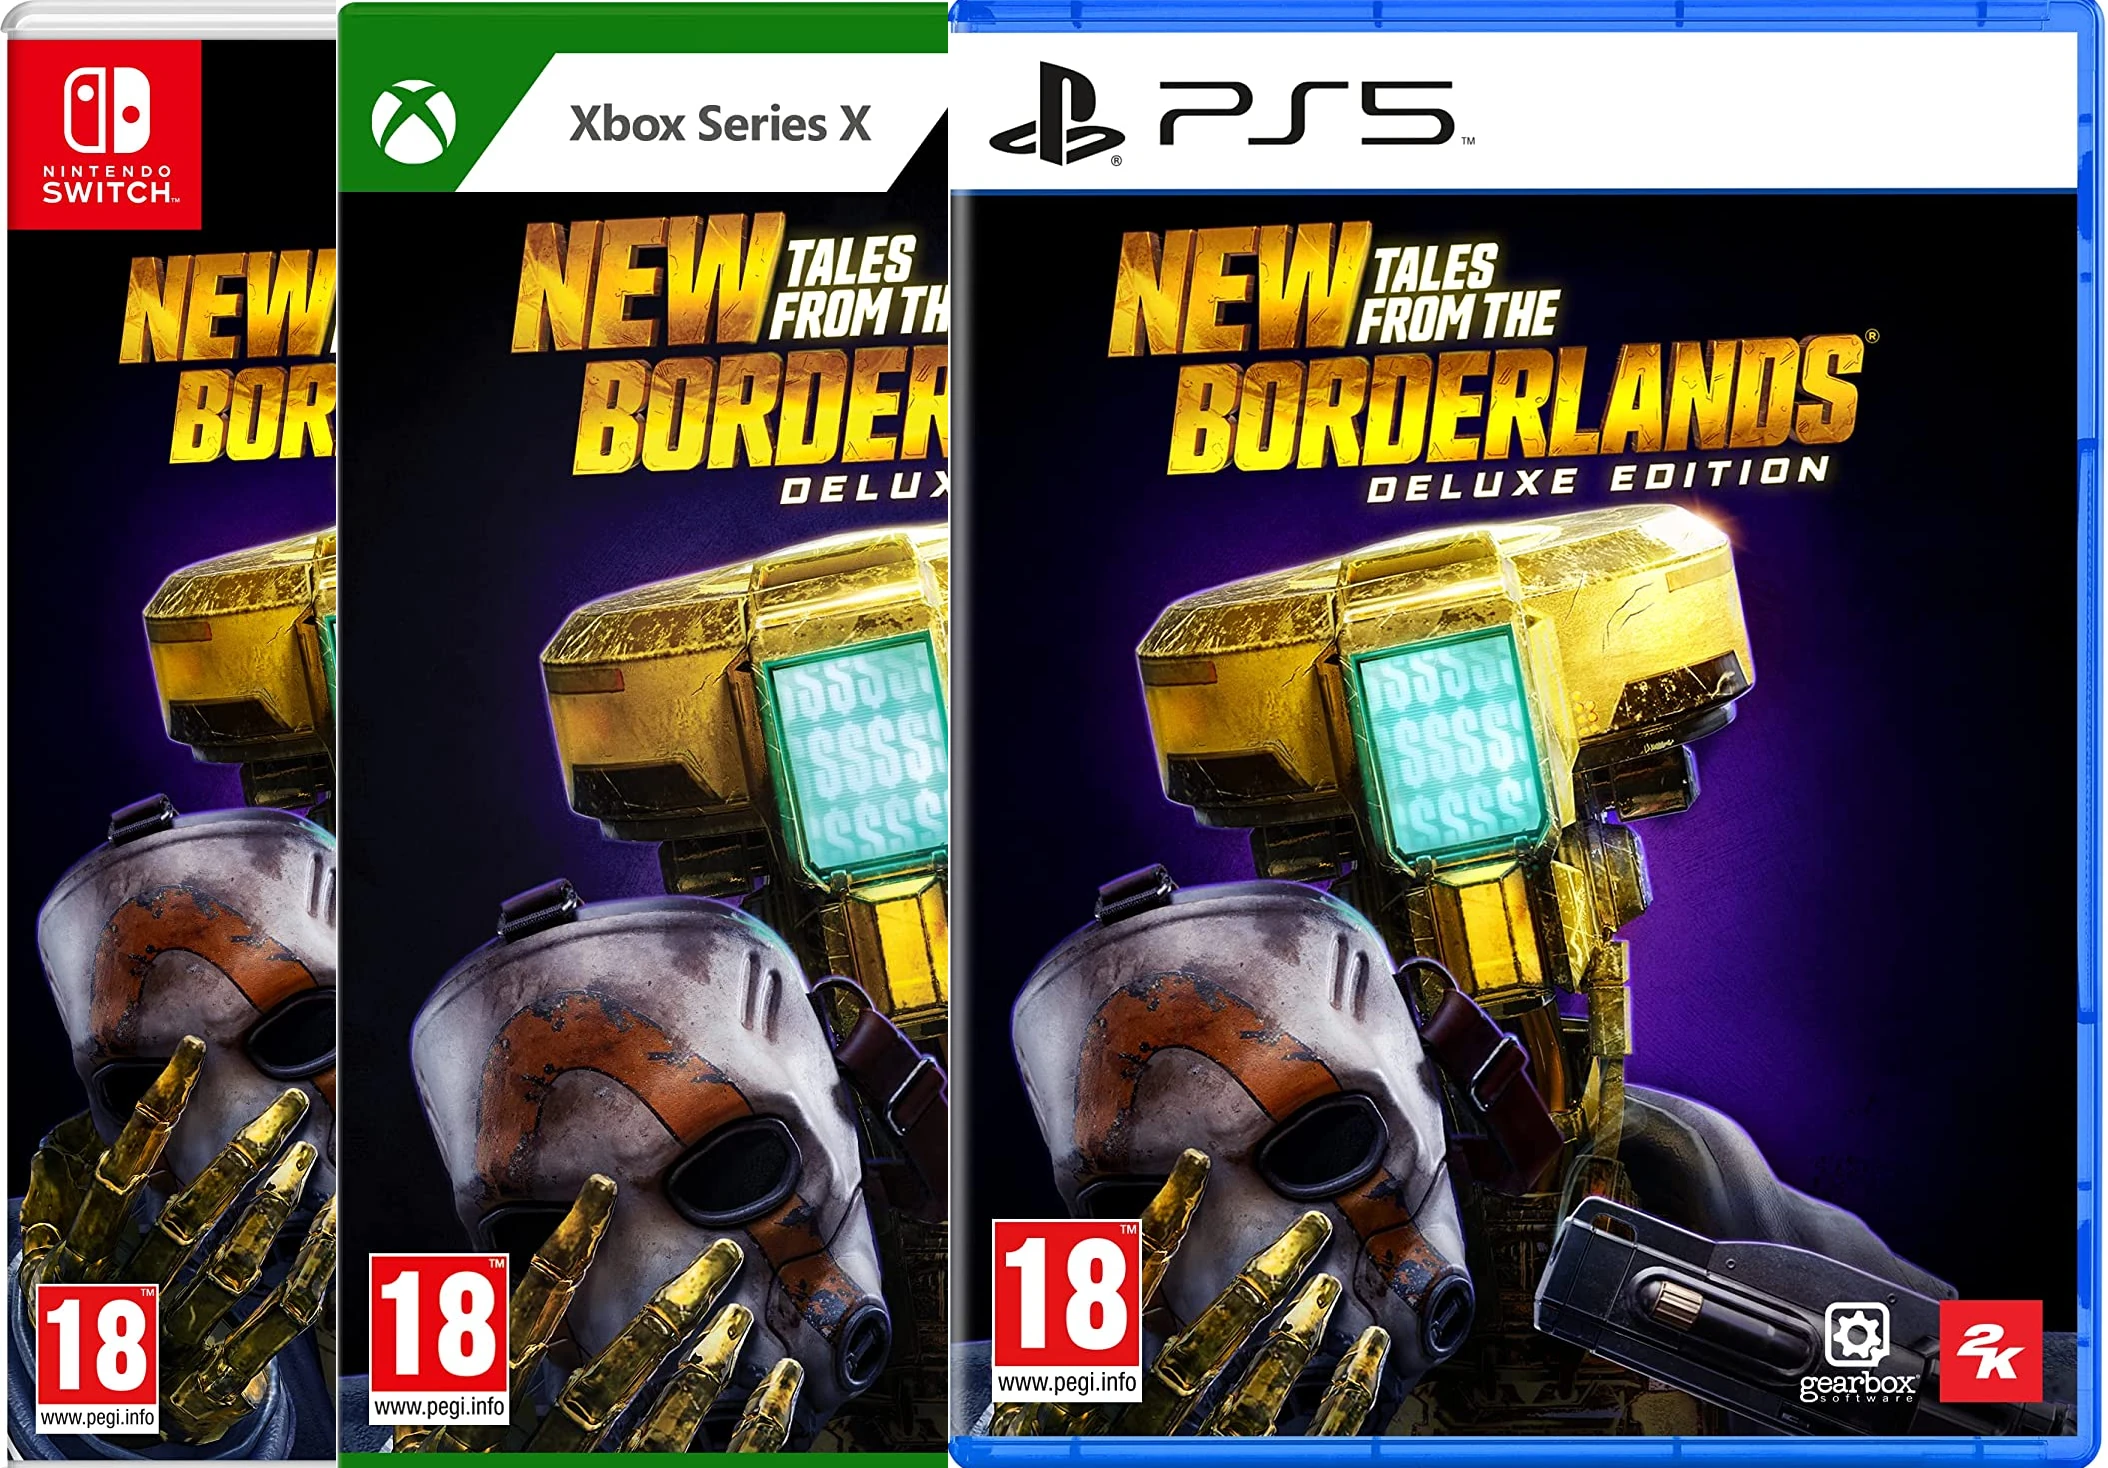 New Tales From The Borderlands - Edition Deluxe